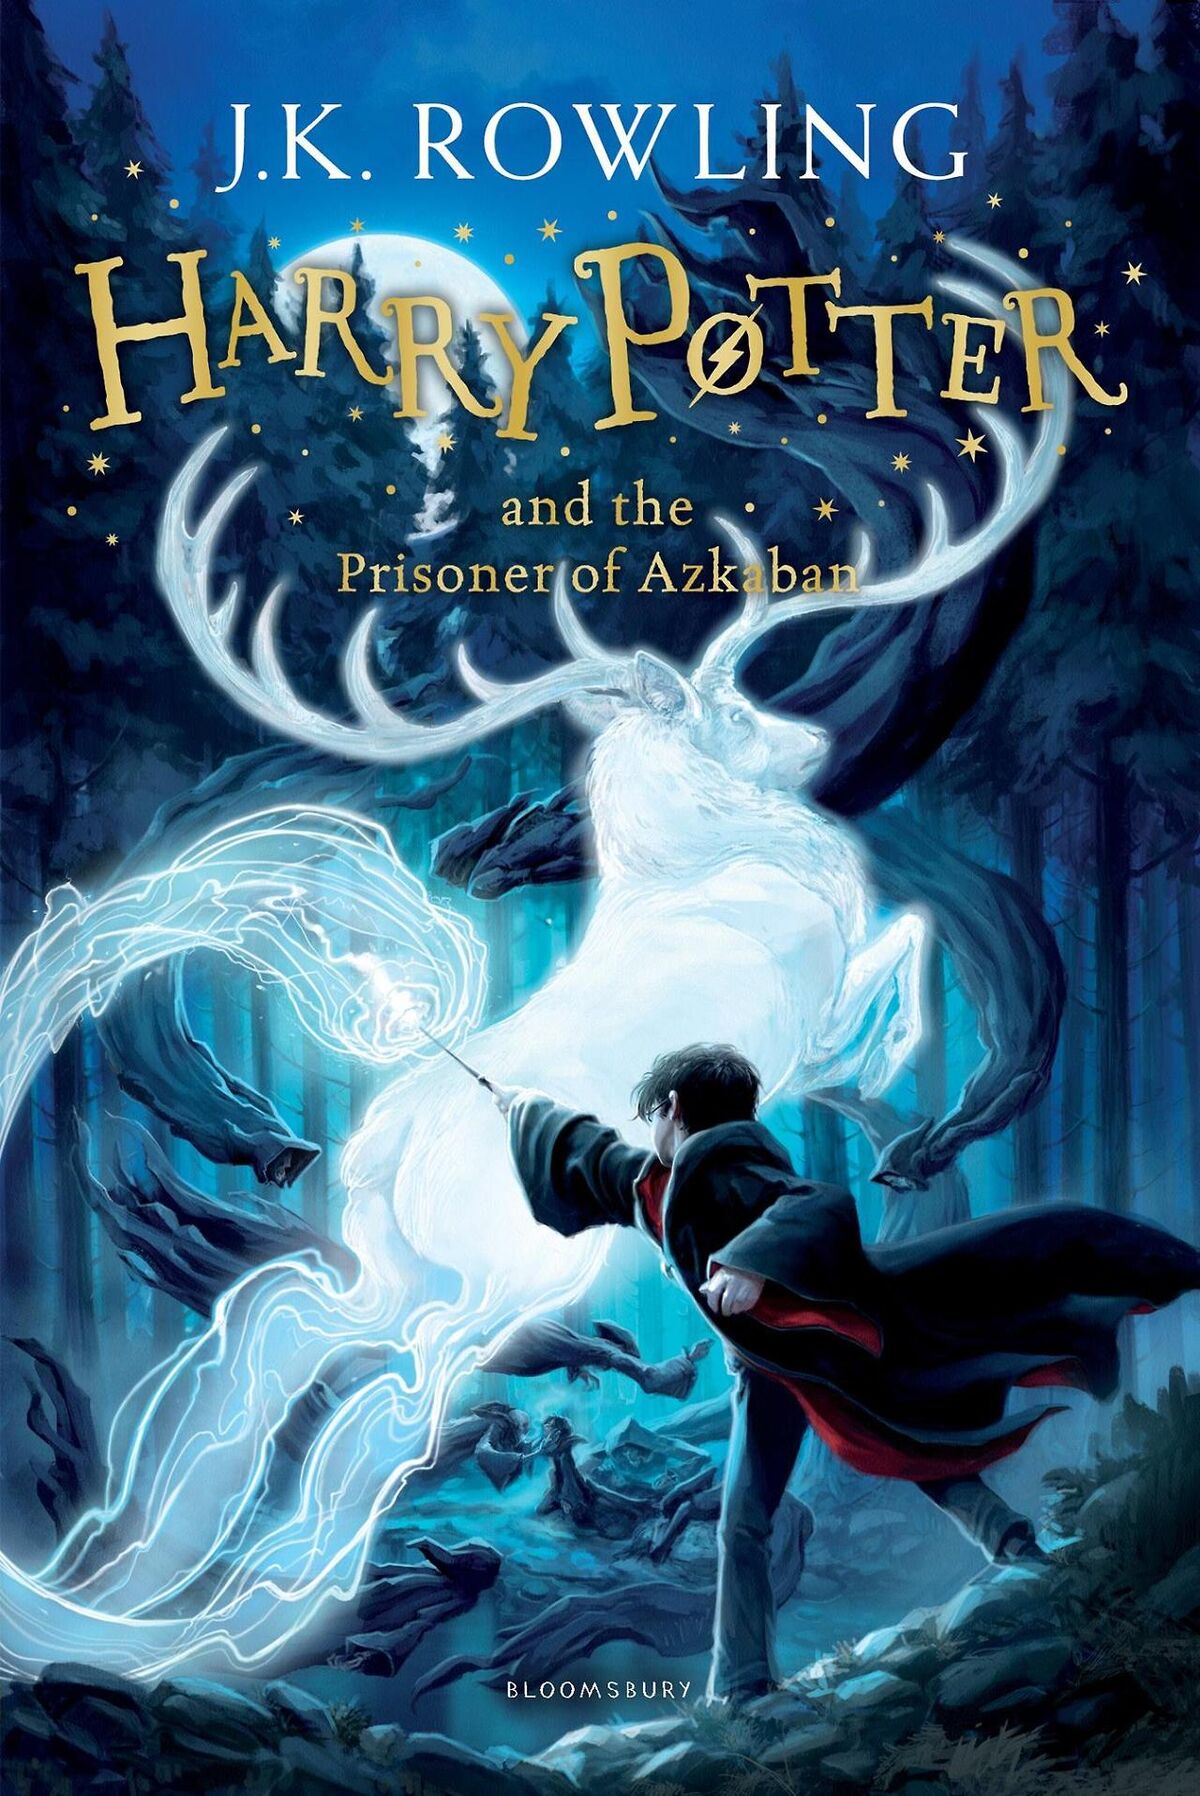 Harry Potter and the Order of the Phoenix – Slytherin Edition: : J.K.  Rowling: Bloomsbury Children's Books